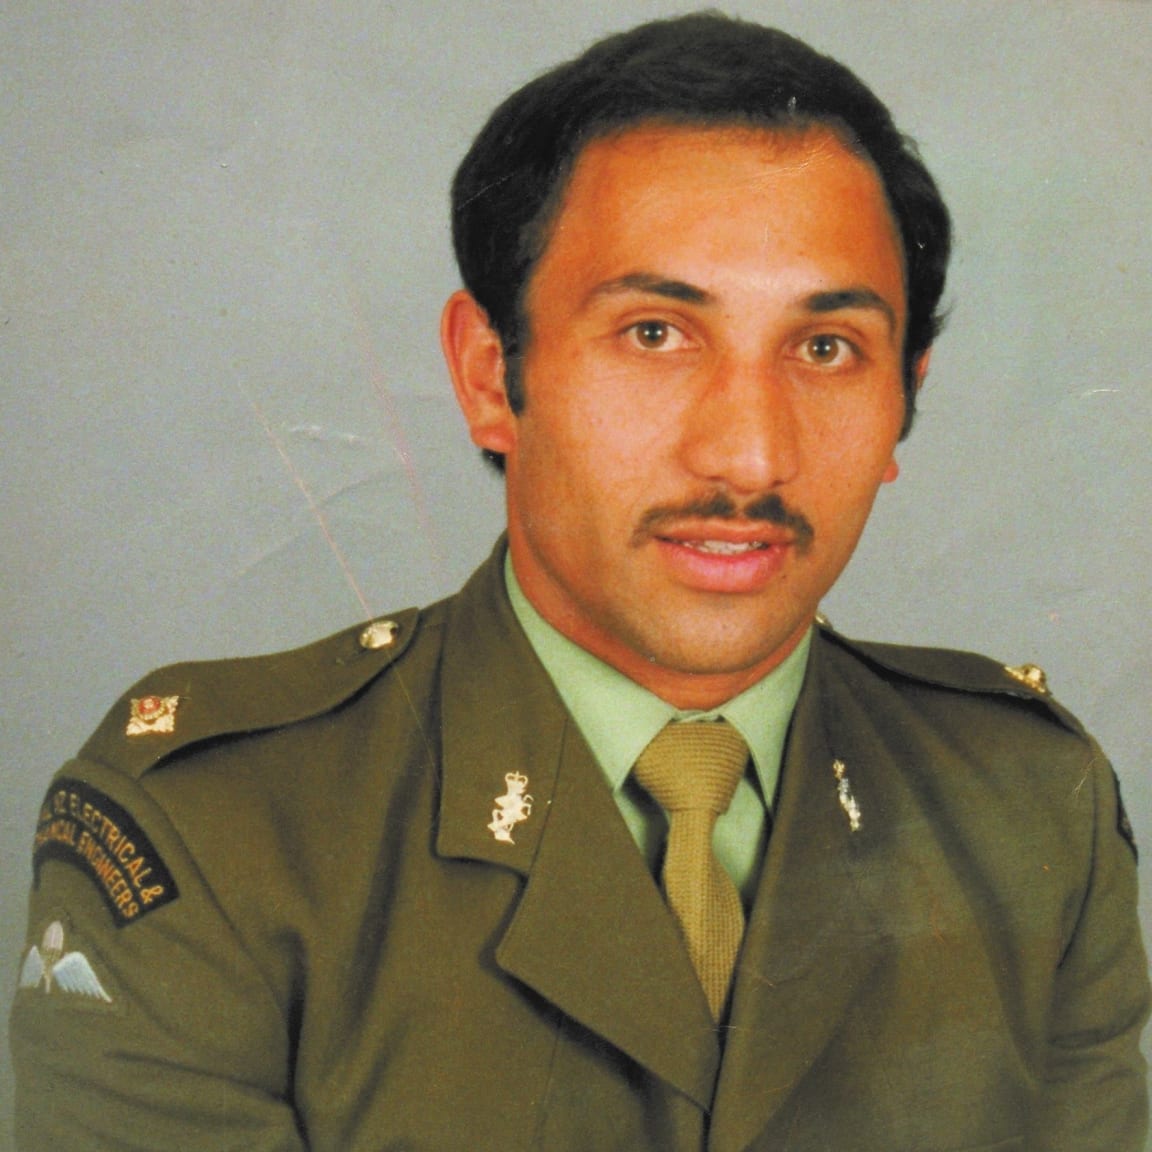 Ron Mark as a Soldier